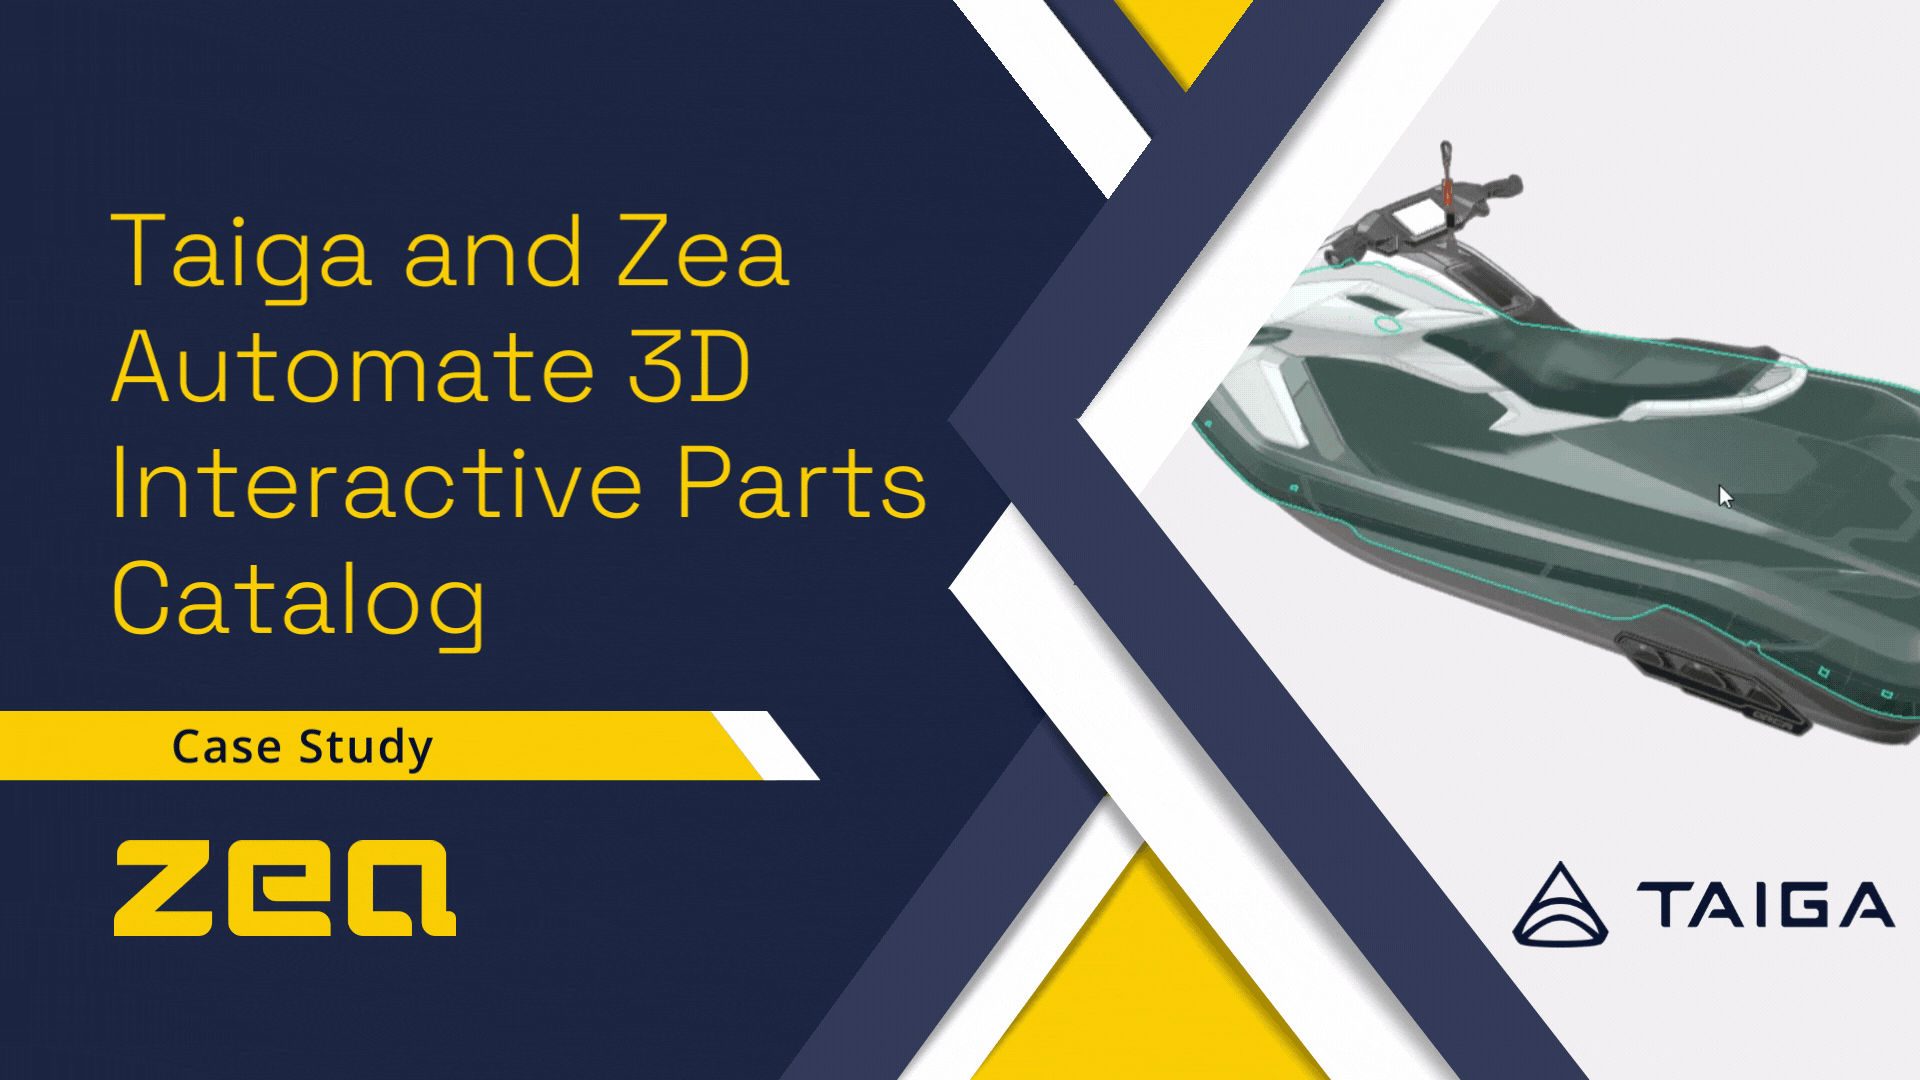 [Case Study] Taiga and Zea Automate 3D Interactive Parts Catalog